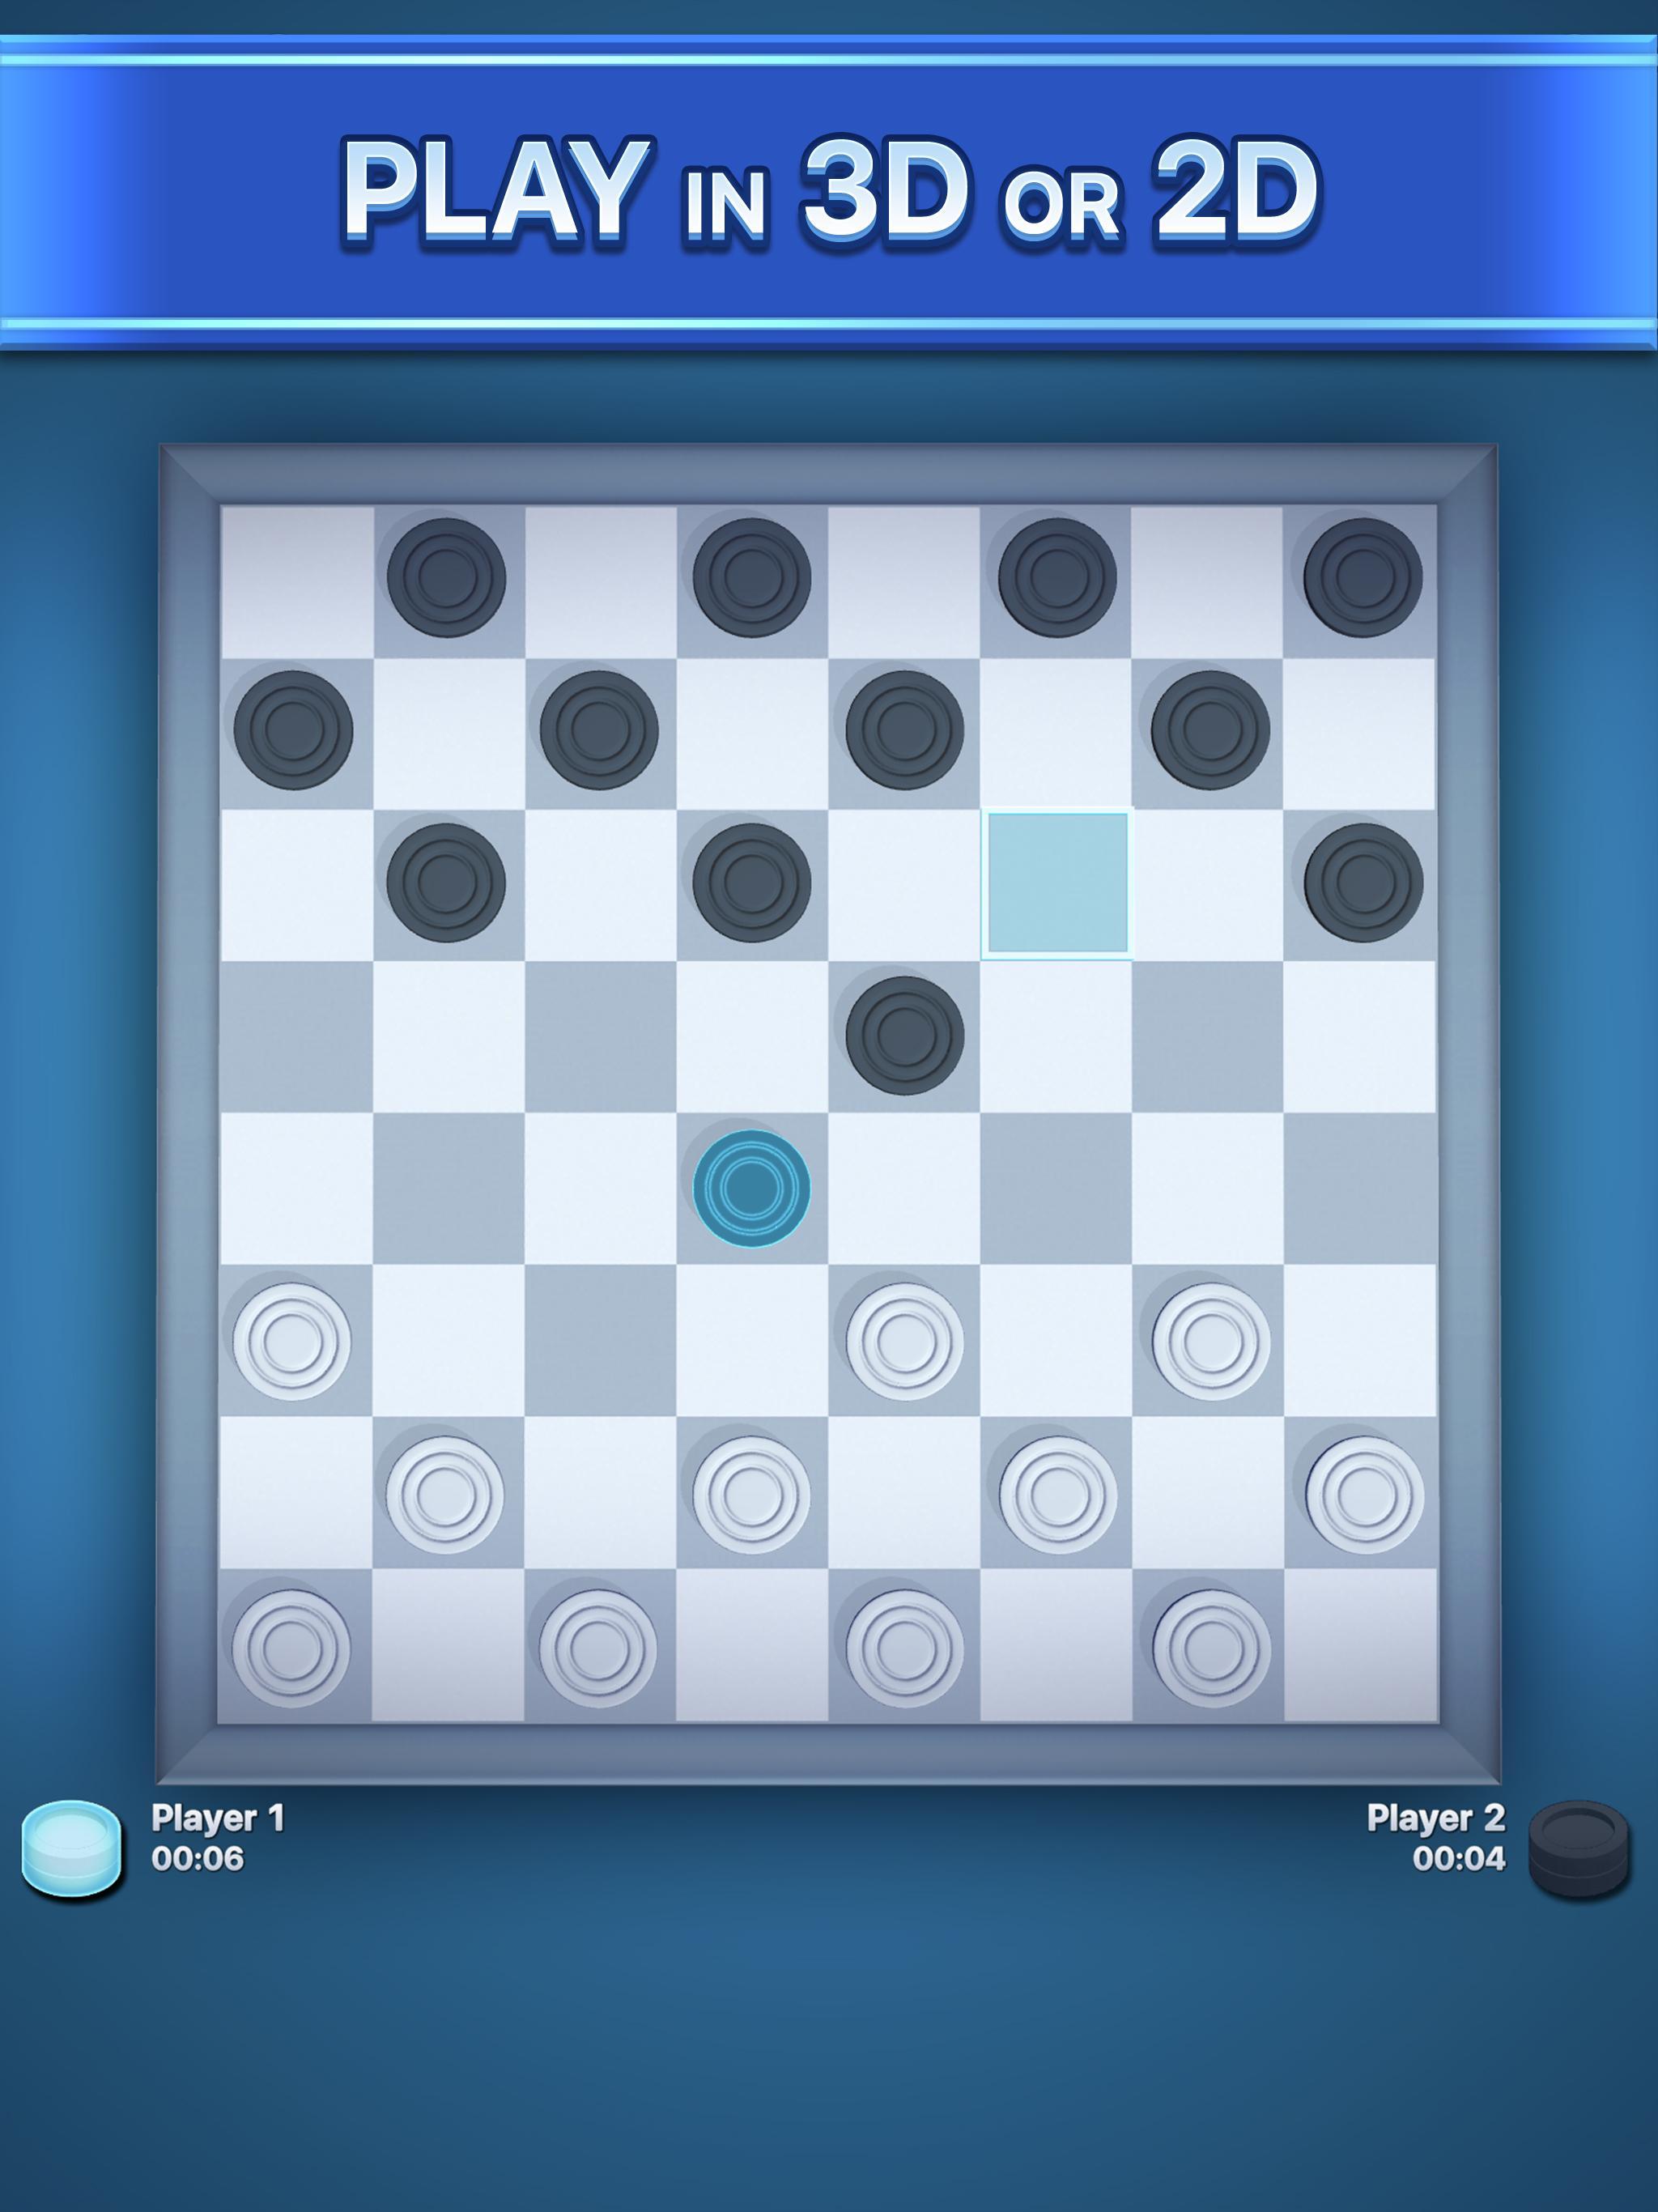 Checkers download. Checkers 2 Player. International Checker which popular than Ocher Checkers.